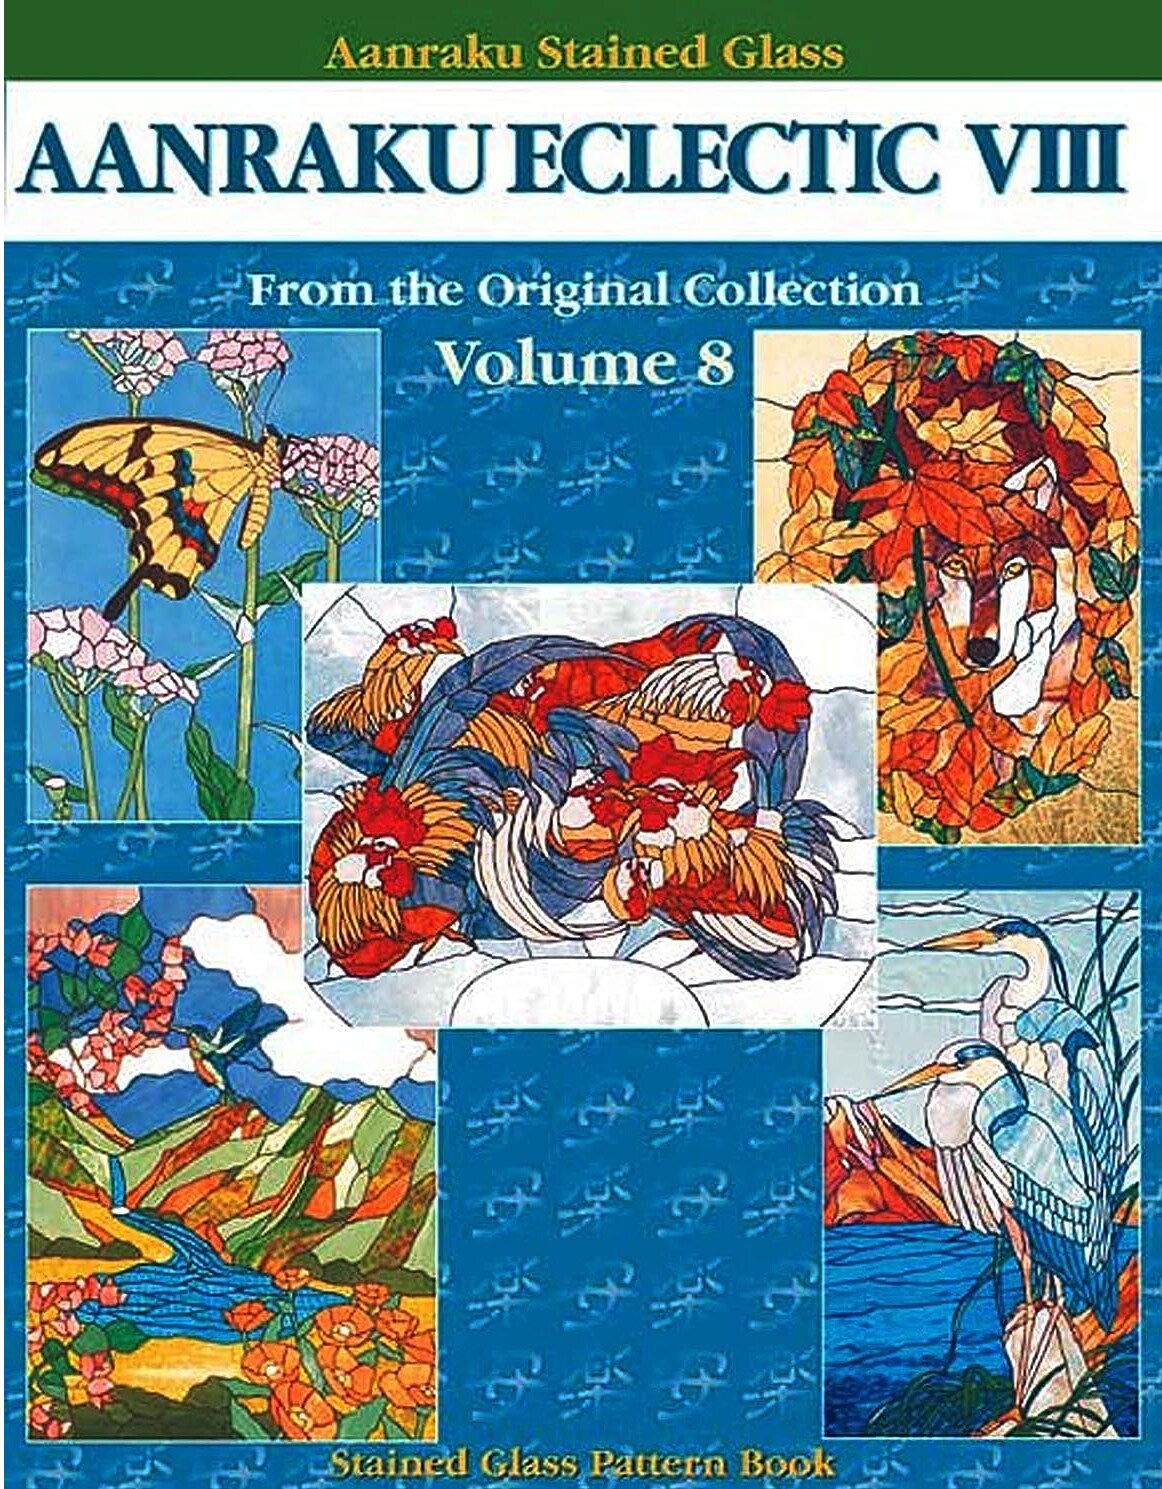 Stained Glass Pattern Book: Aanraku Eclectic Stained Glass Pattern Book Volume 8